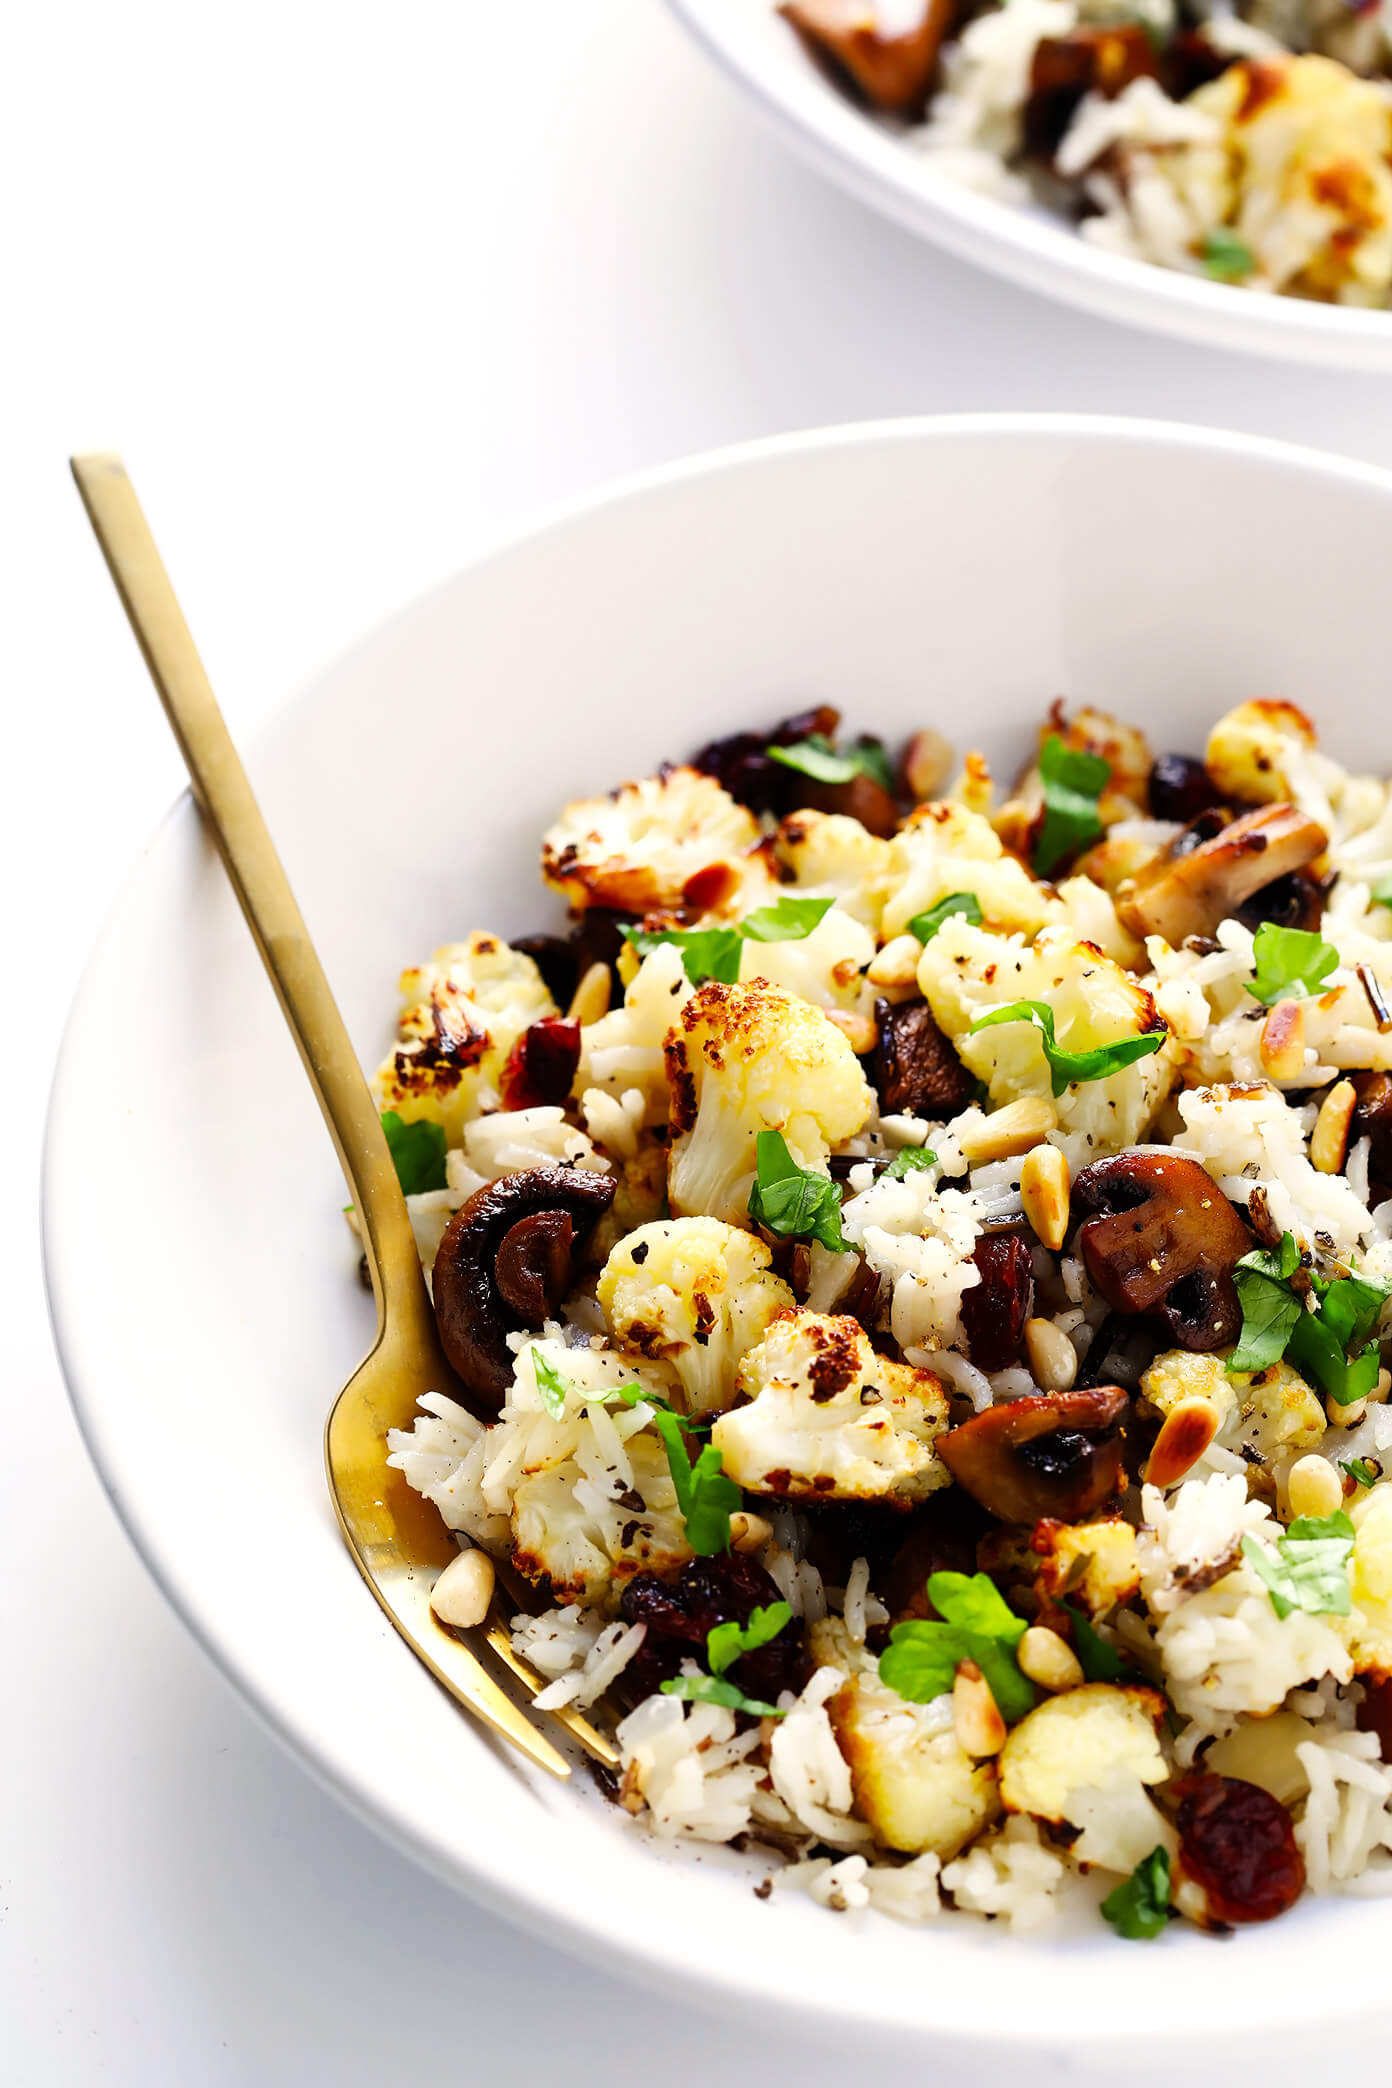 This Roasted Cauliflower, Mushroom and Wild Rice "Stuffing" is the perfect recipe to serve as a Thanksgiving side dish...or as dinner any night of the year! It's naturally gluten-free, vegetarian and vegan. It's made with delicious lemon-garlic rice, dried cranberries, toasted pine nuts, and roasted veggies. And it's AWESOME.